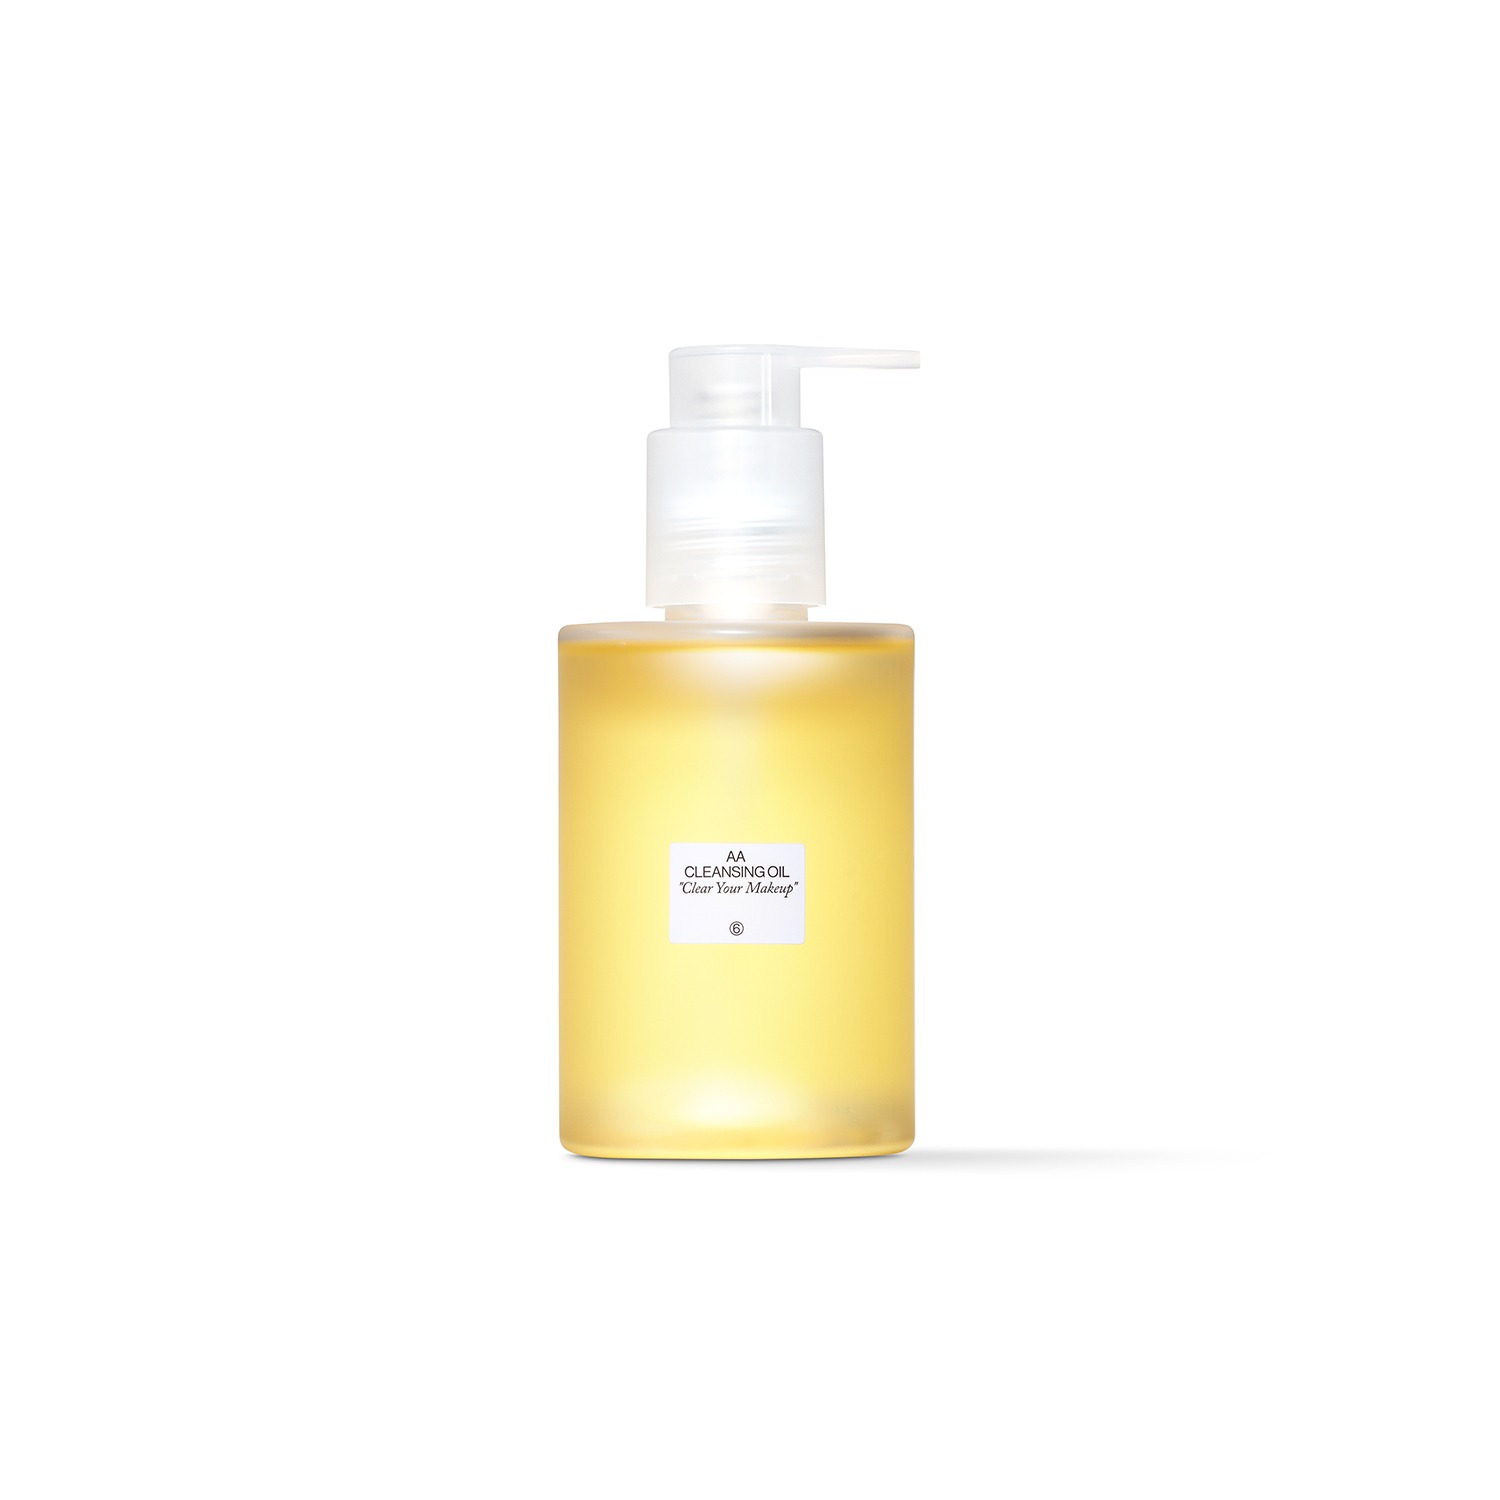 AA CLEANSING OIL - 샹프리(SHANGPREE)